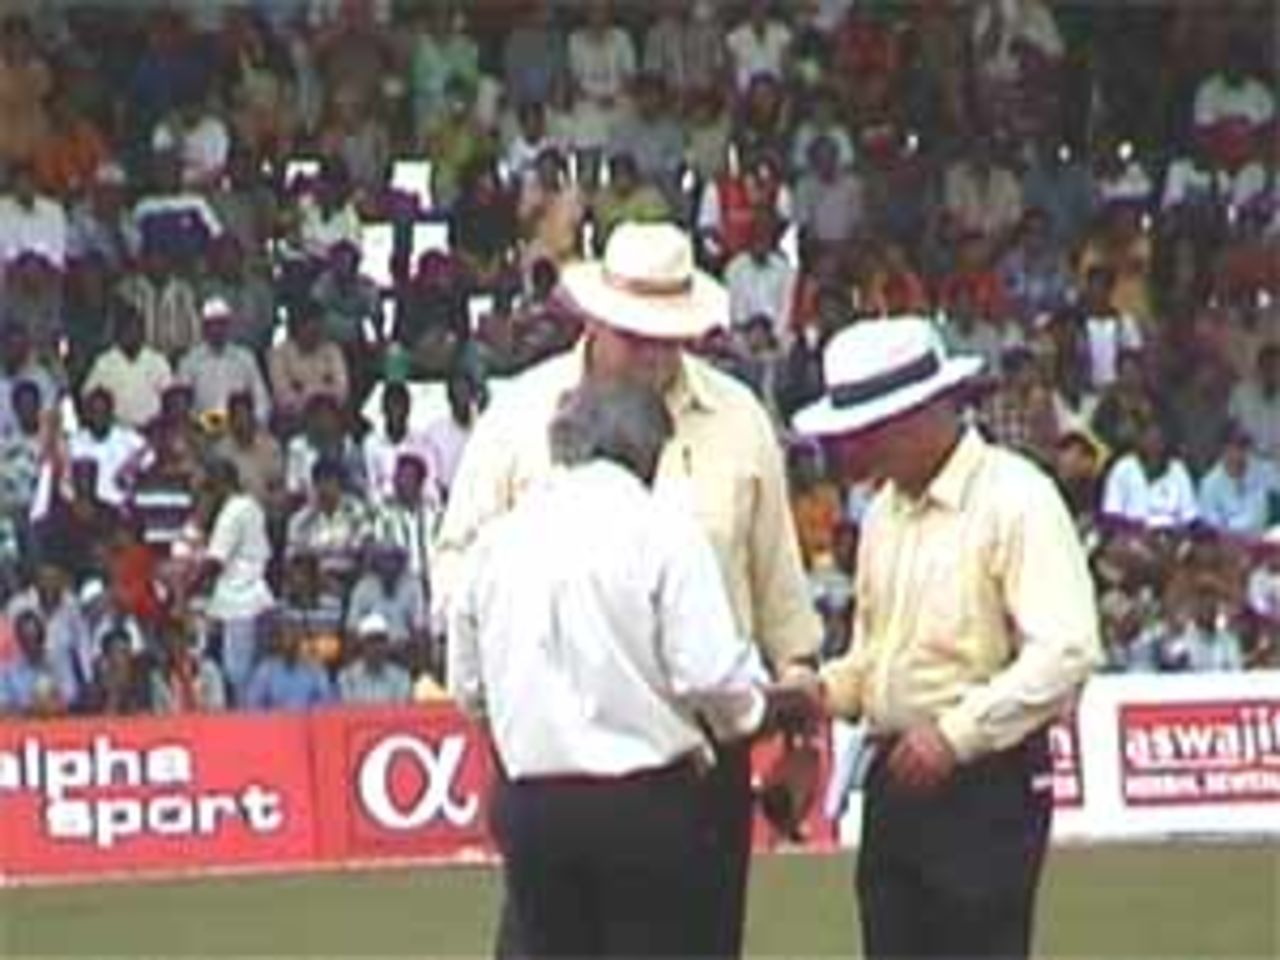 Umpires take a close look at the white ball that has become dirty, India v West Indies (Final), Coca-Cola Singapore Challenge, 1999-2000, Kallang Ground, Singapore, 7 Sep 1999.